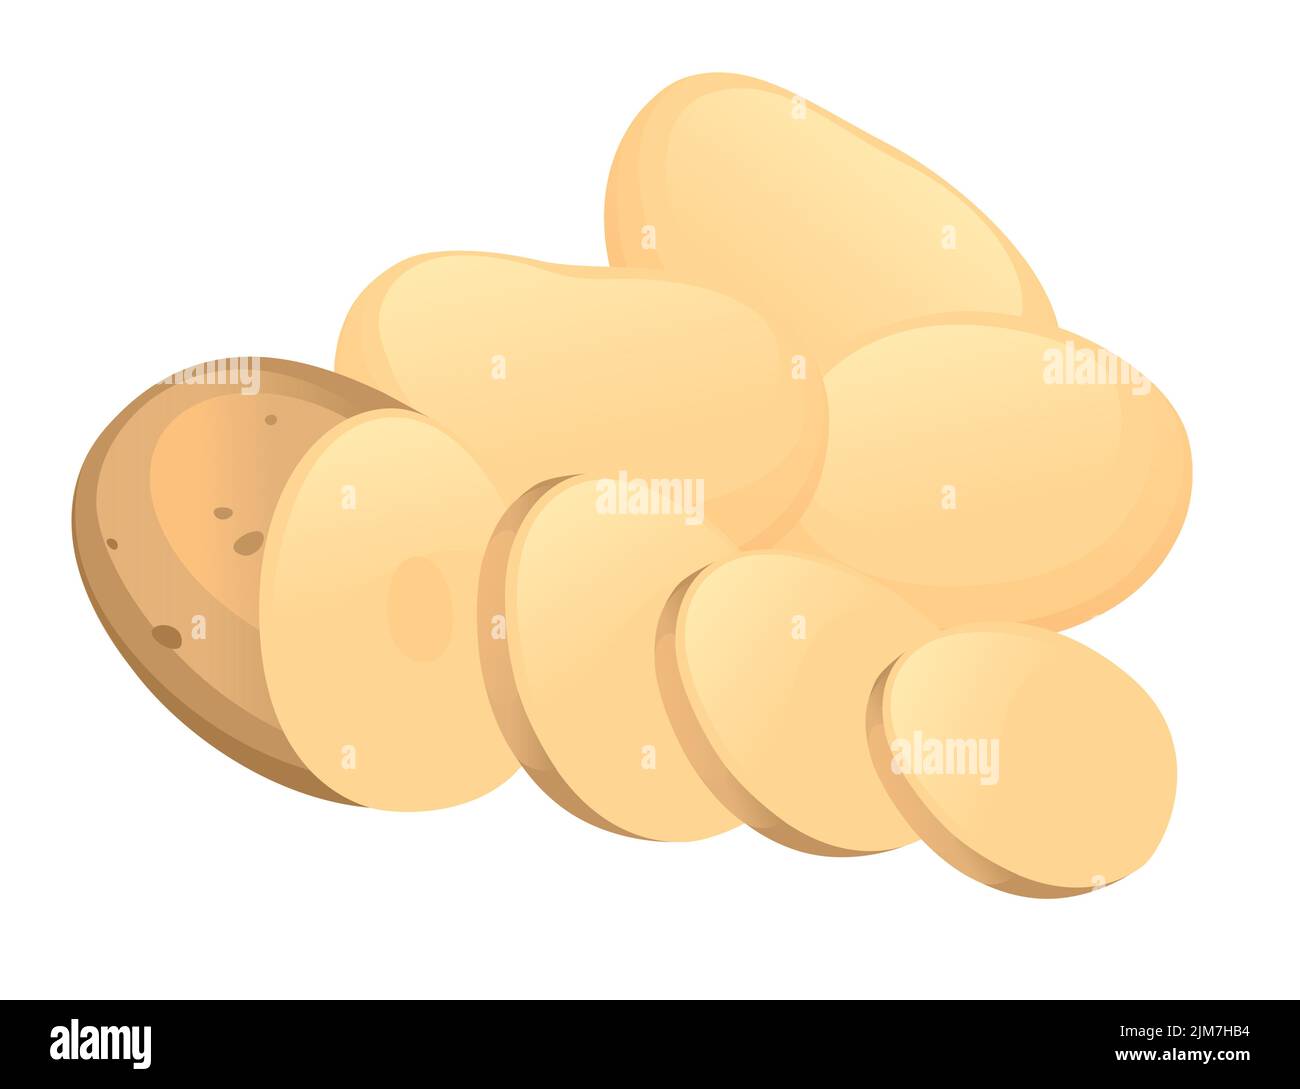 Fresh raw unpeeled potatoes vector illustration isolated on white background Stock Vector